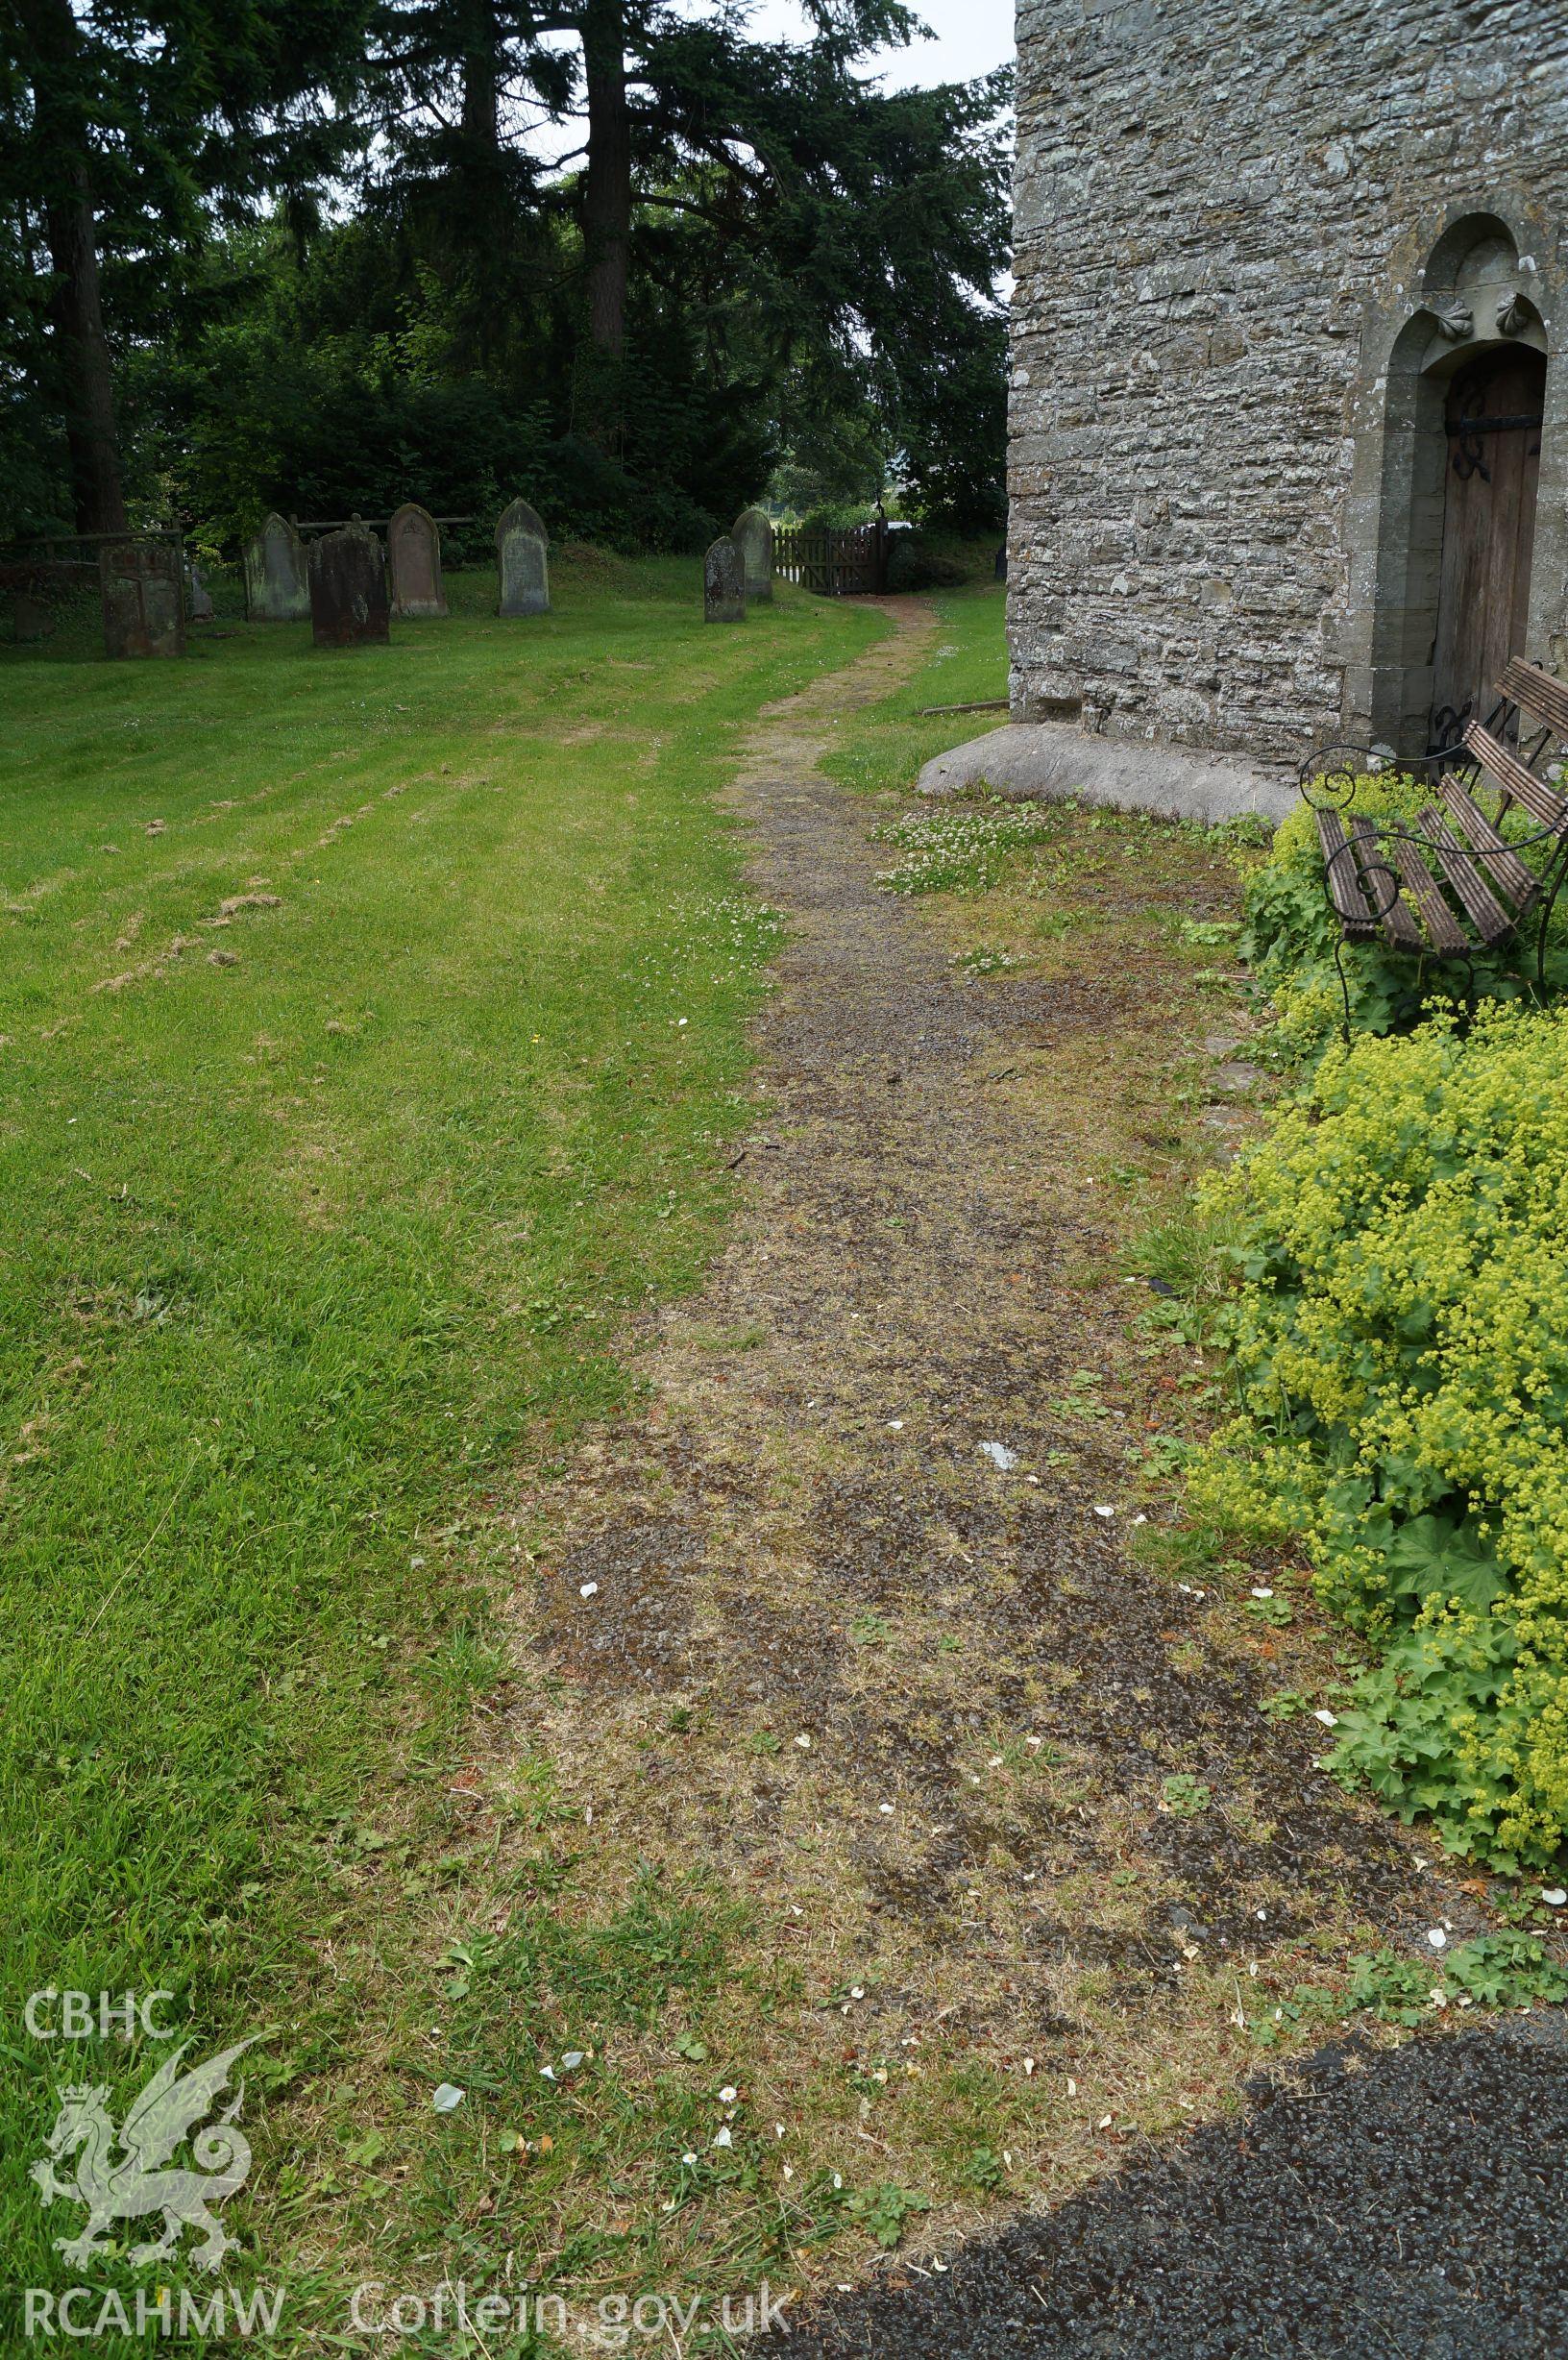 View 'looking west northwest at the pathway running west northwest from the porch of St. Mary's' in Gladestry, Powys. Photograph and description by Jenny Hall and Paul Sambrook of Trysor, 21st June 2017.